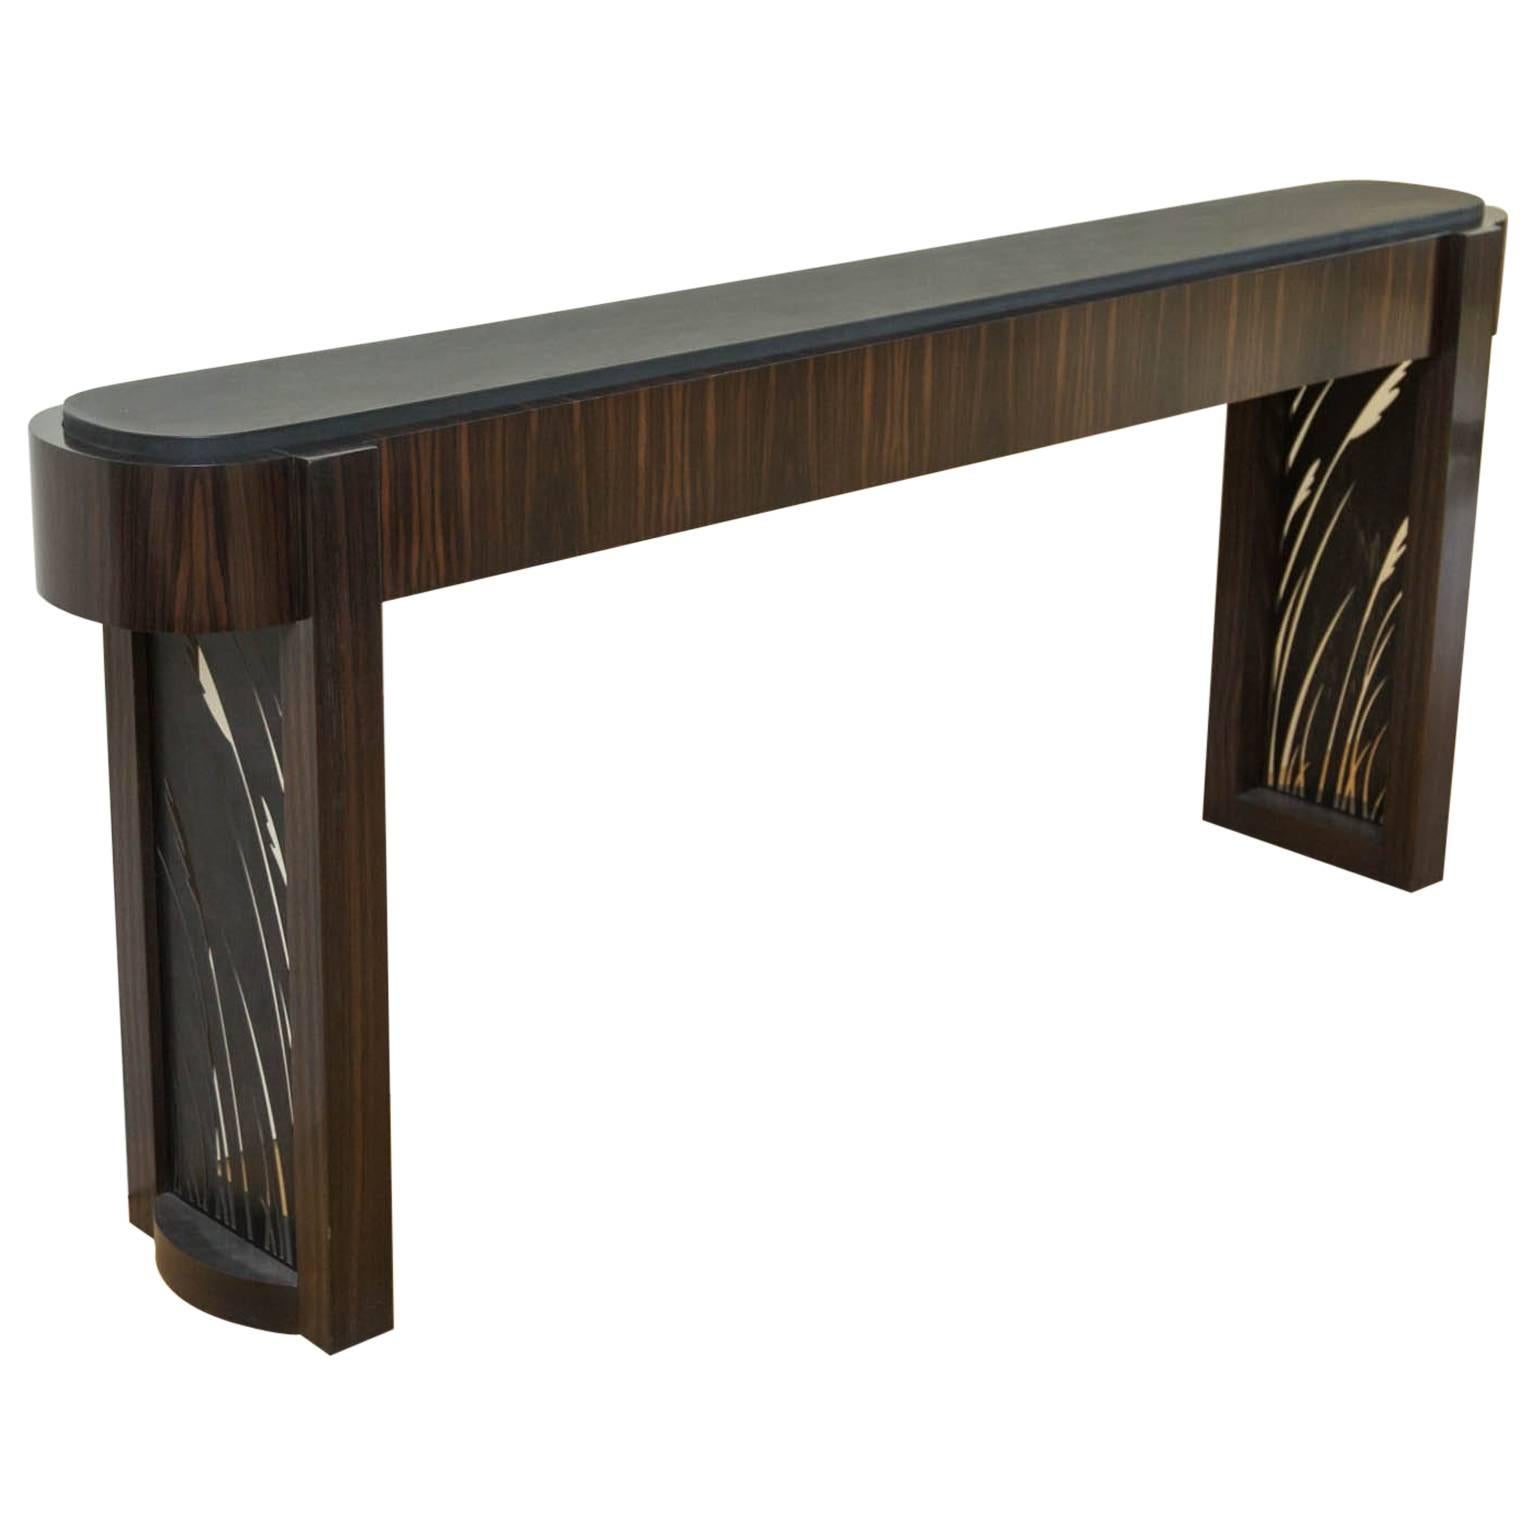 Macassar Ebony and Patinated Steel Console Table by Gregory Clark For Sale